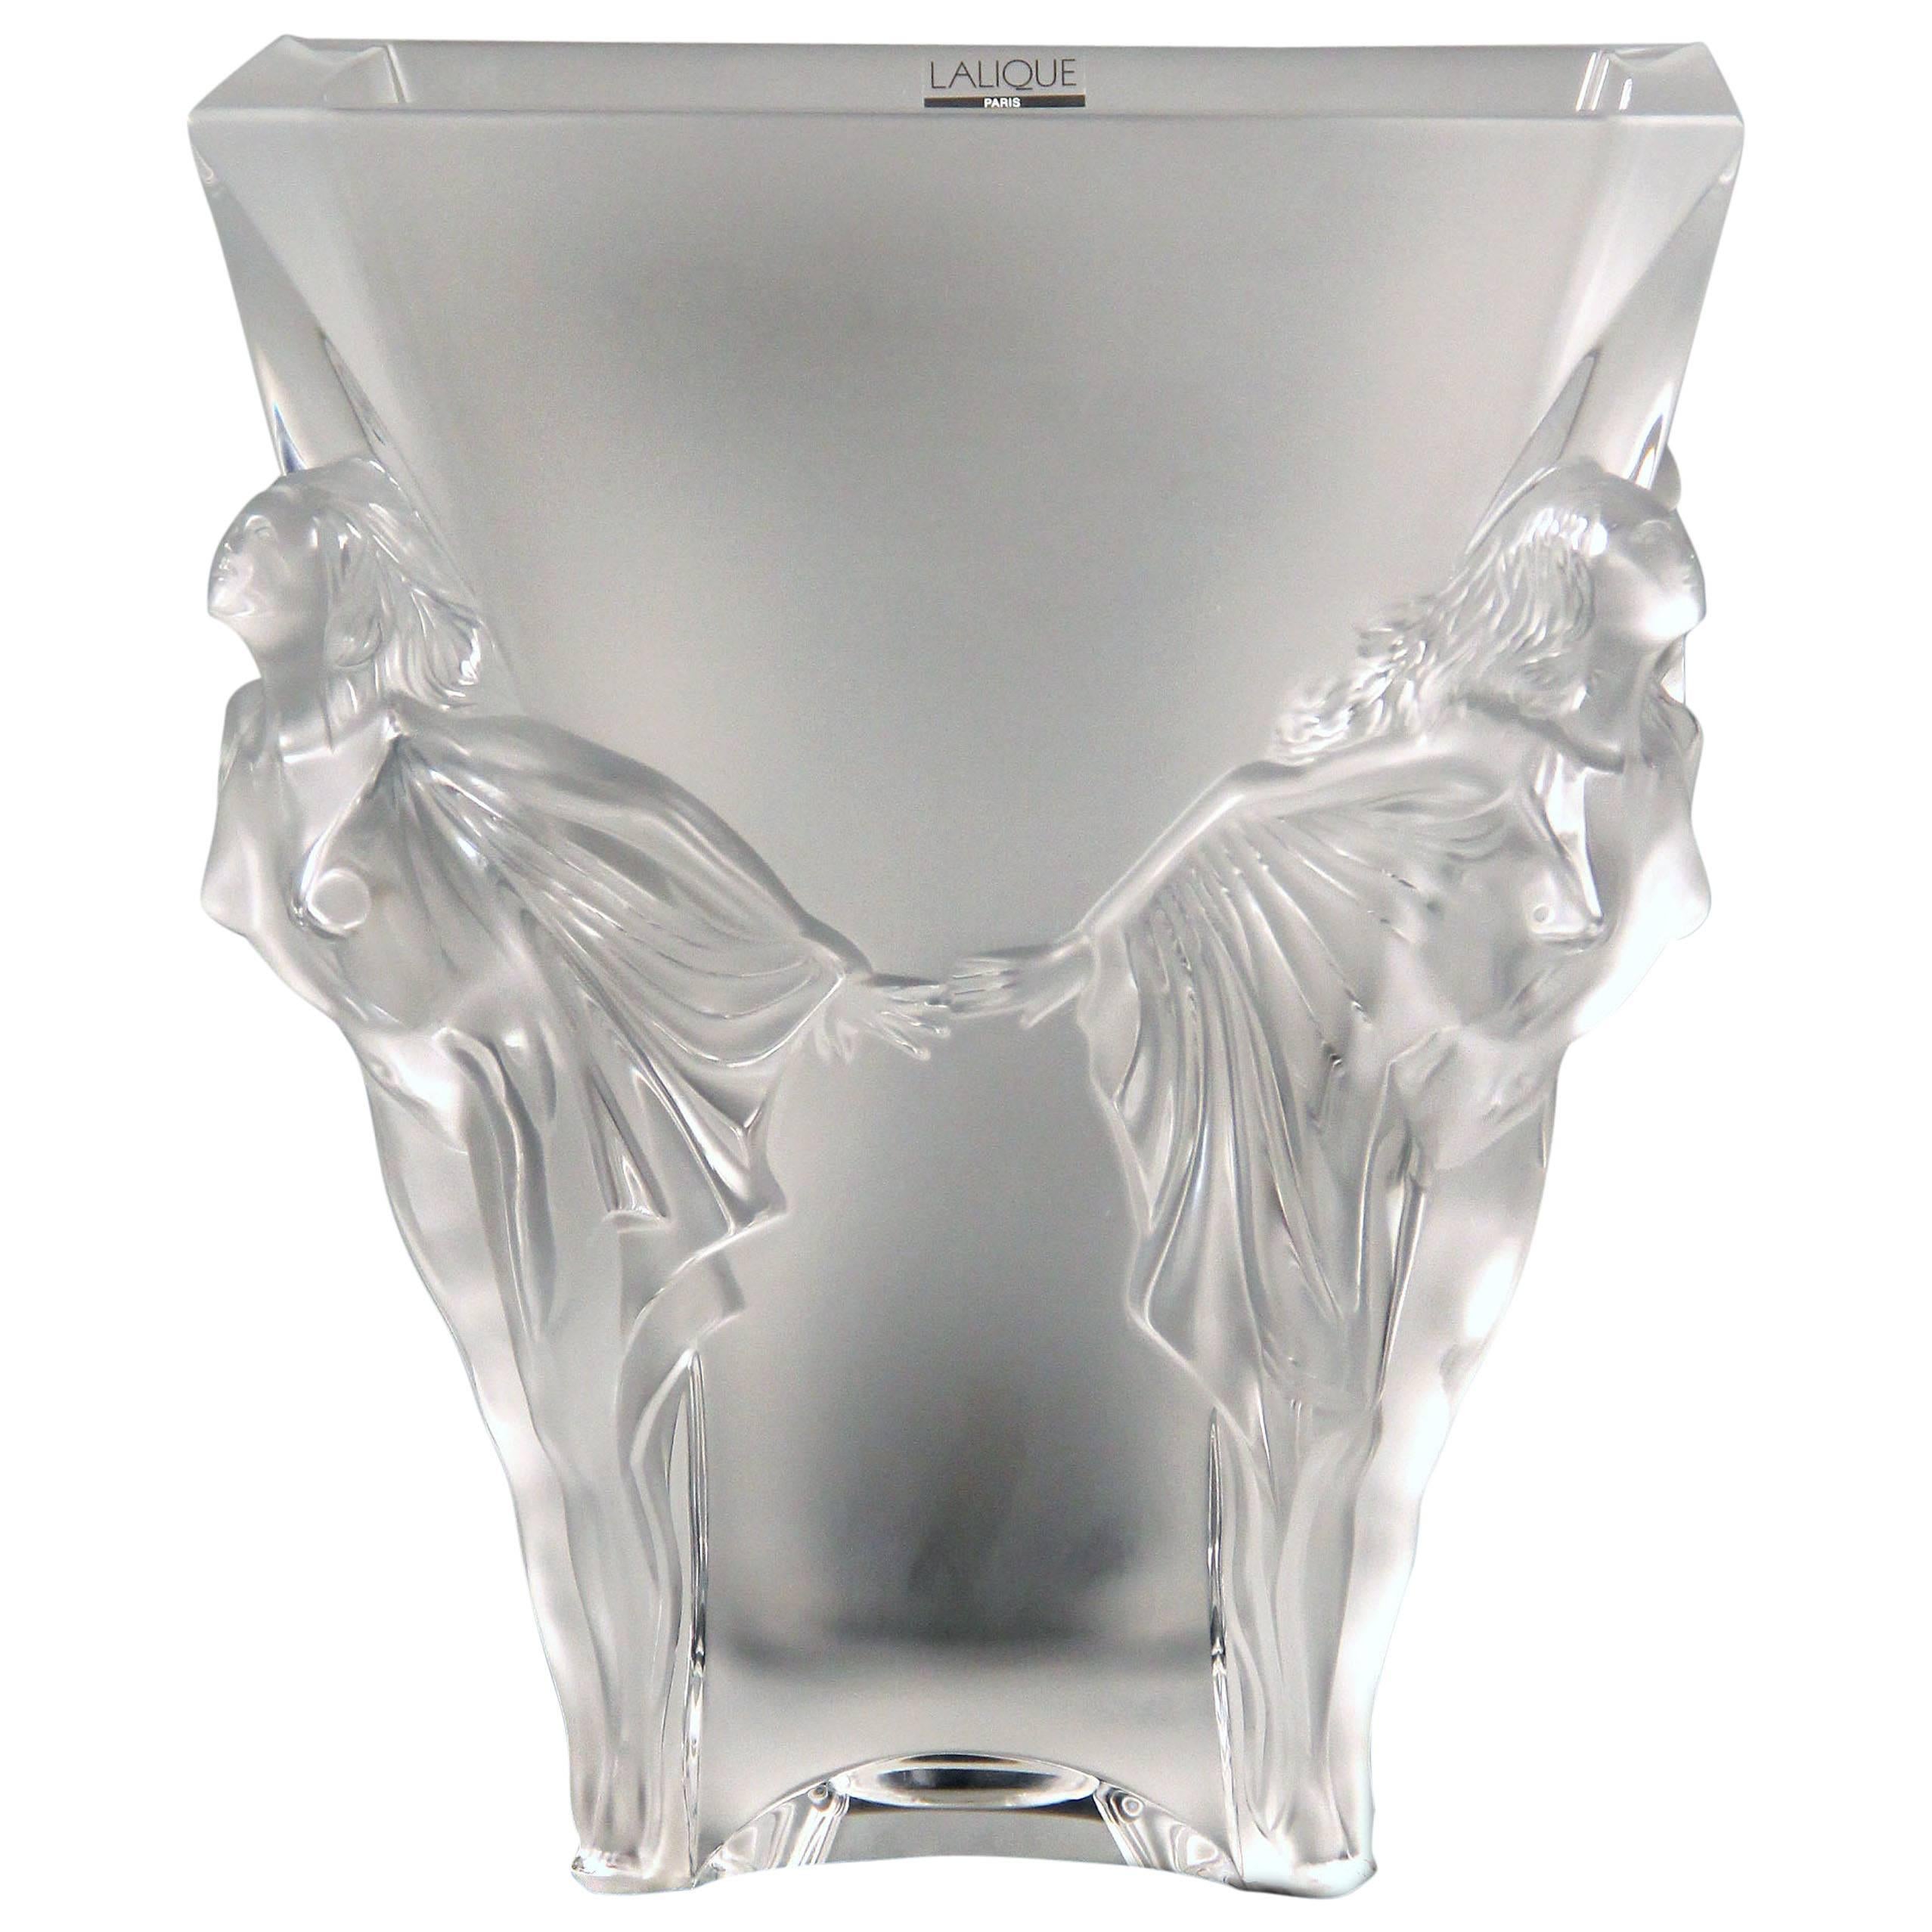 Rare Lalique Special Order Square, Shaped "Space Vase"